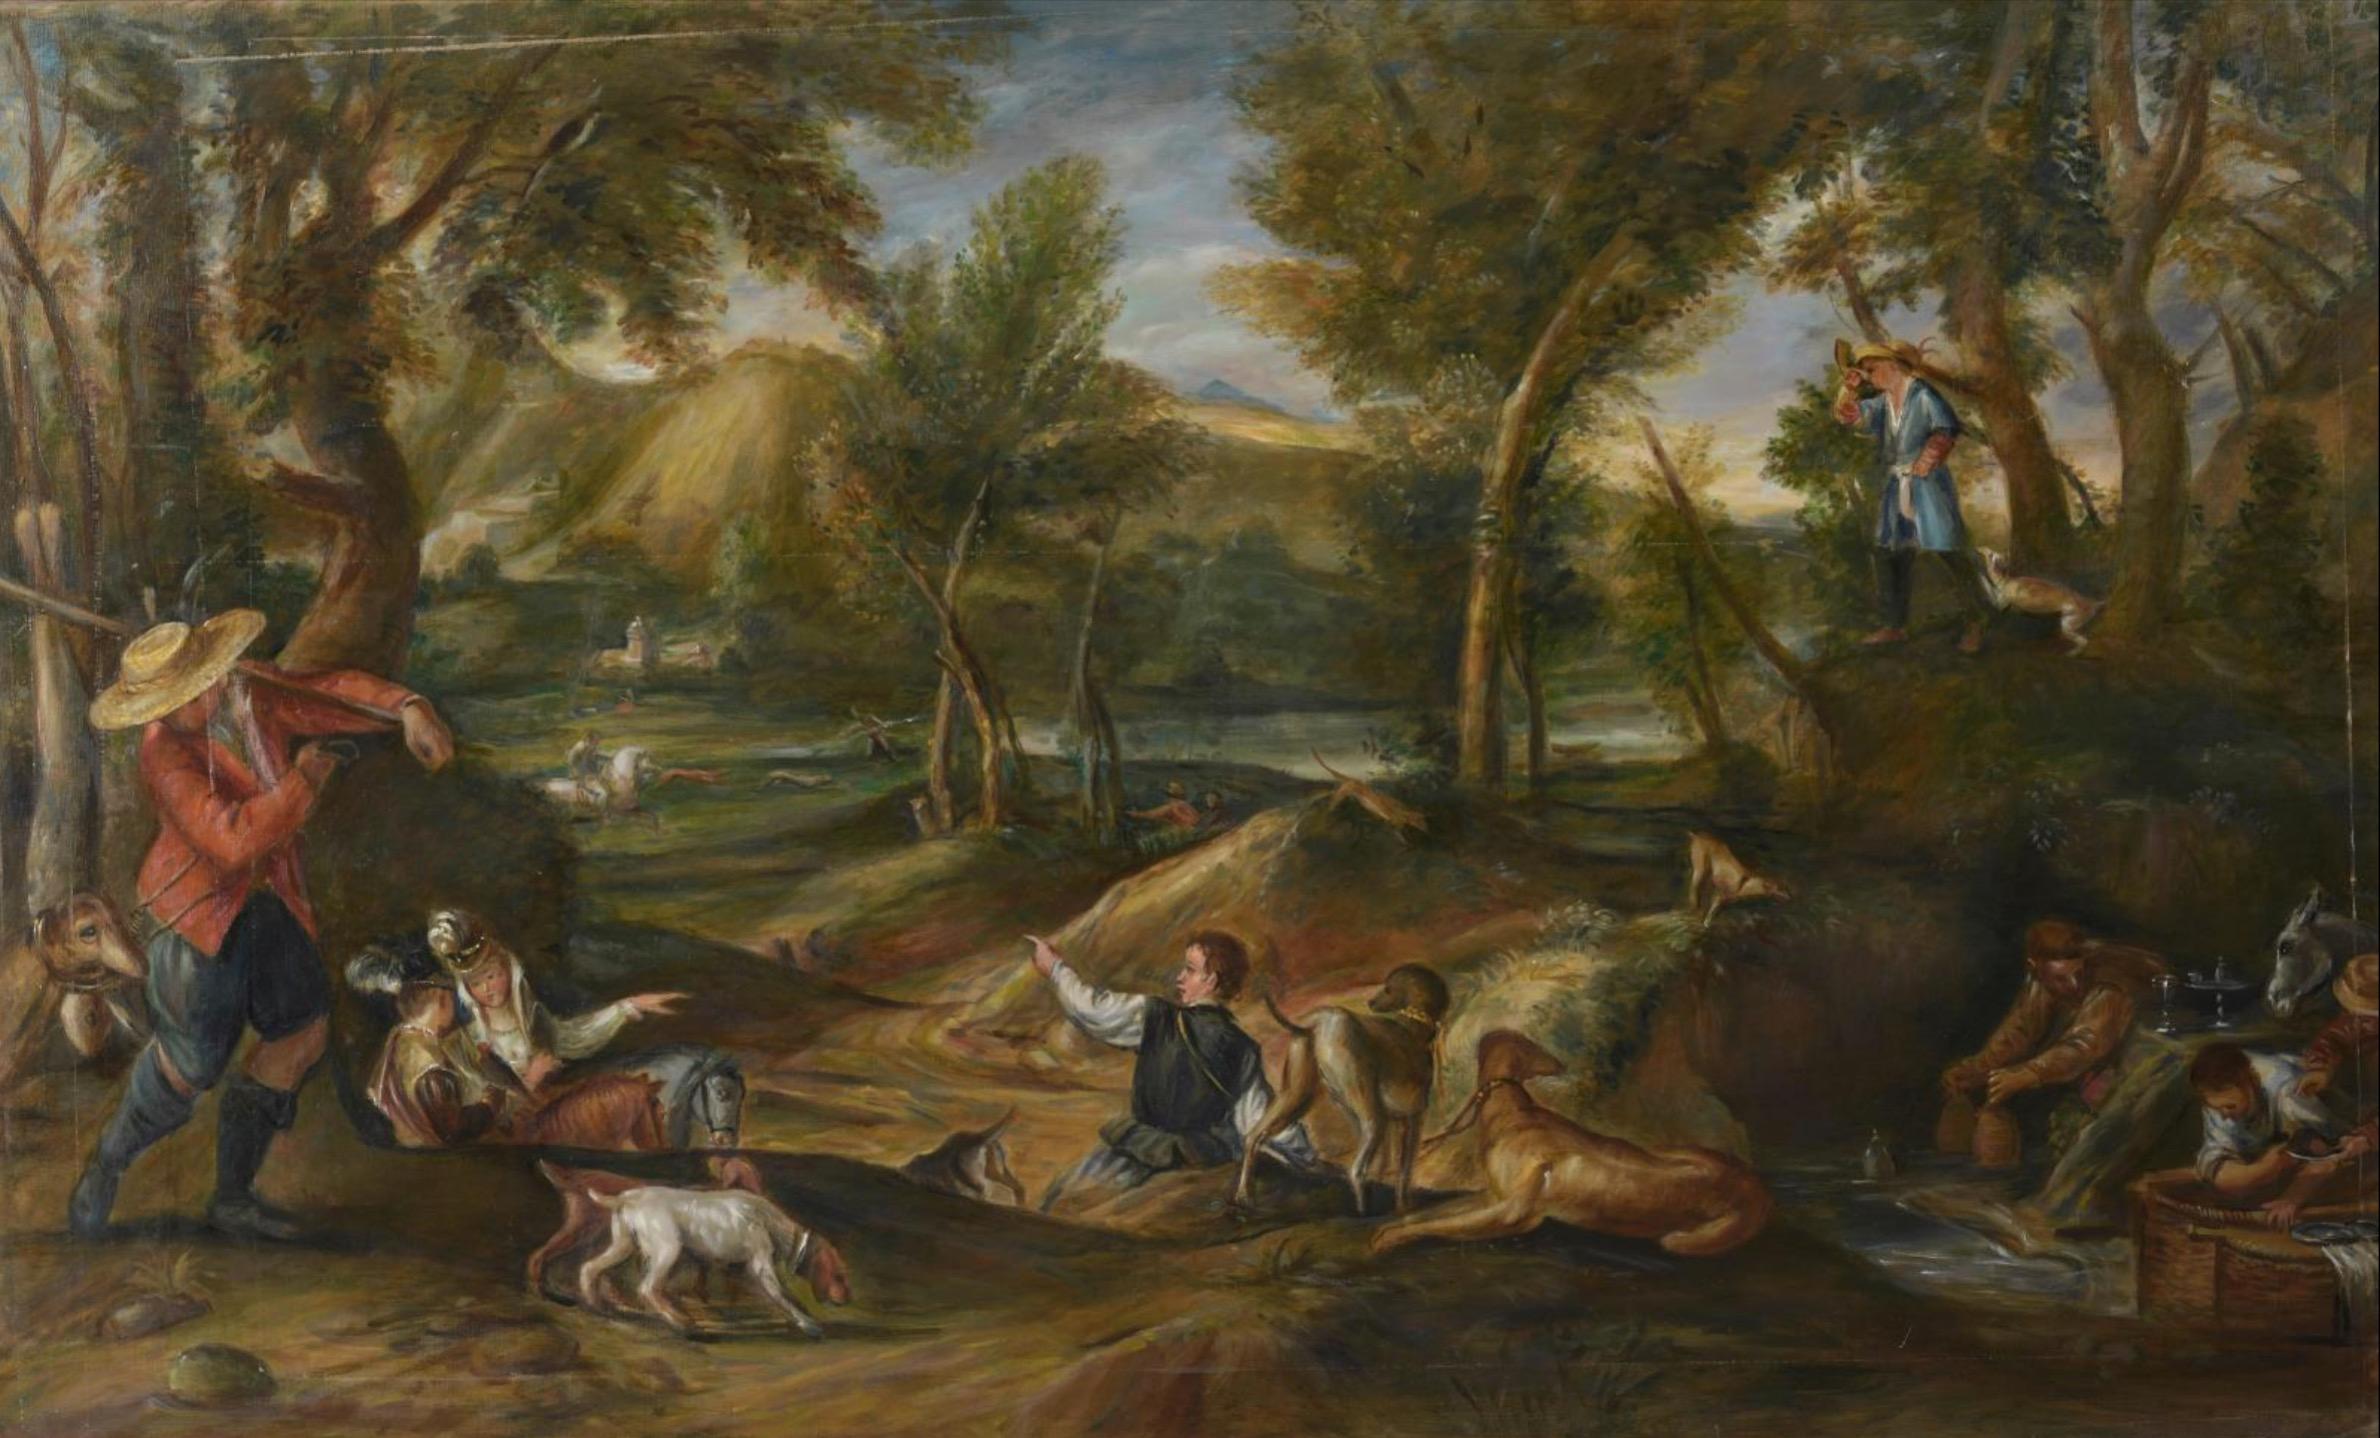 Atelier Dagher after Carracci (1560-1609) Figurative Painting - The Hunt, Large Oil Painting on Canvas by Louvre Copyist